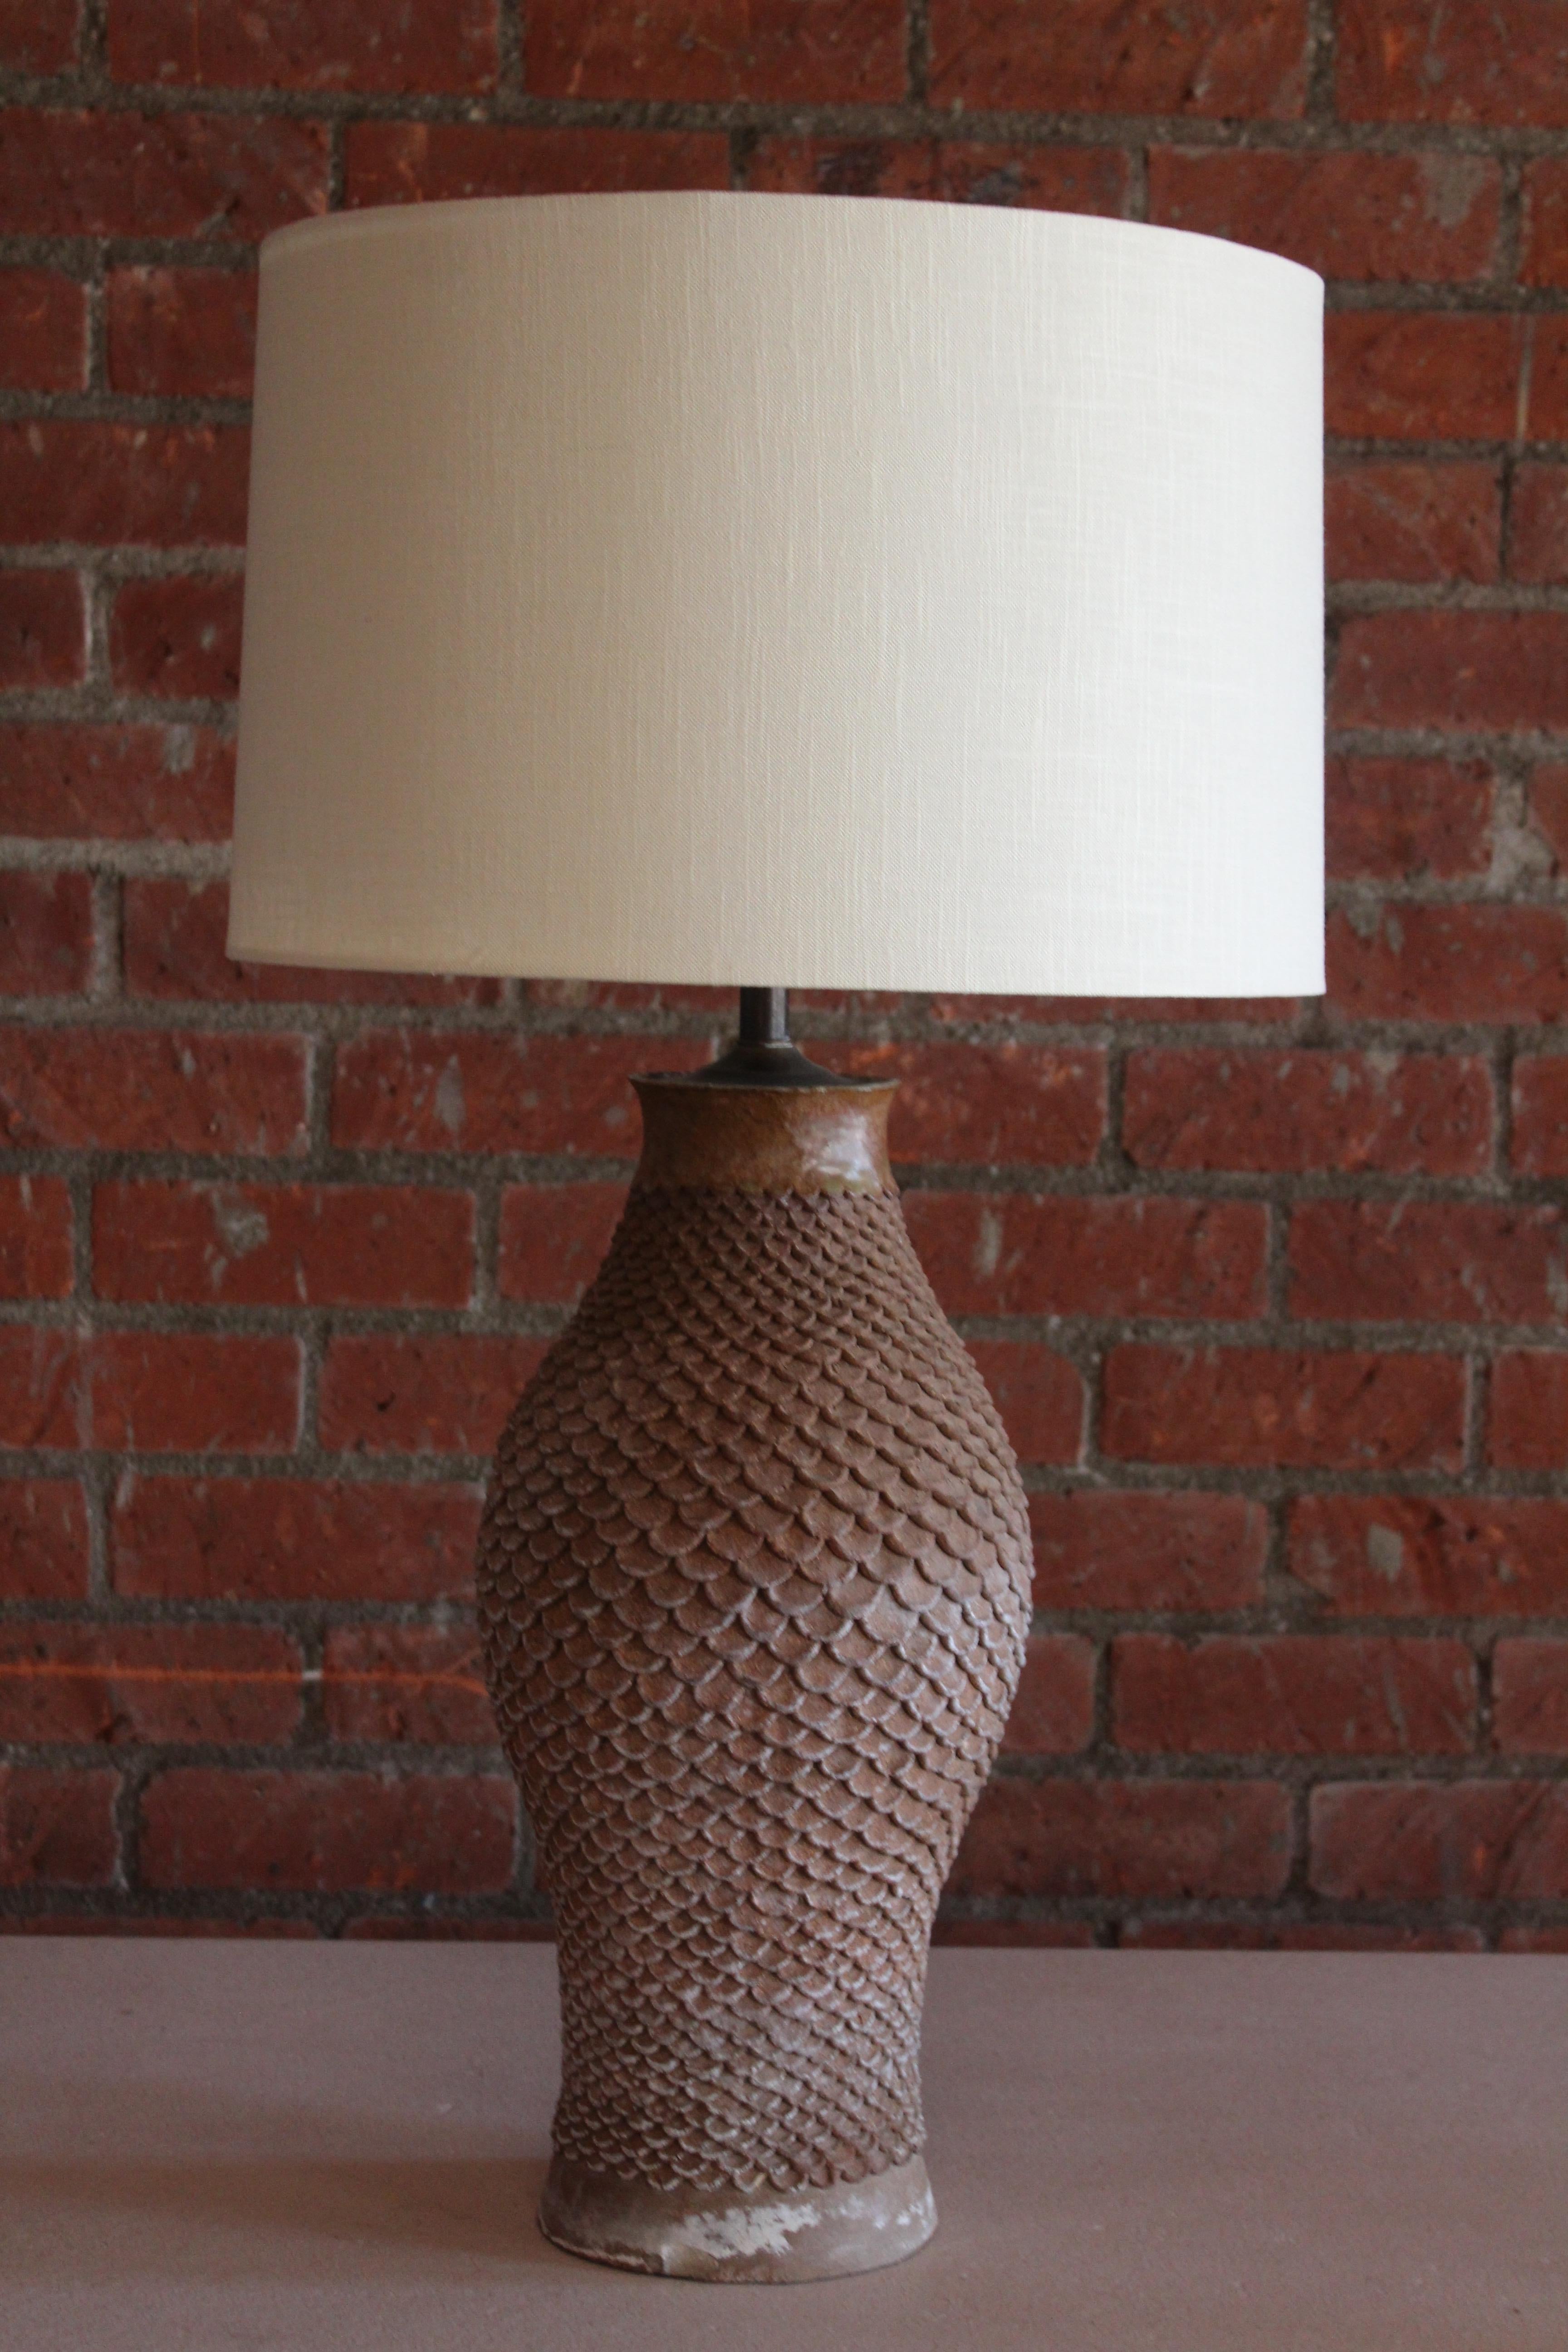 Vintage handmade studio pottery stoneware ceramic lamp. Signed by Barbara Godart, 1960s. Newly French wired. New custom made shade in Belgian linen. In overall good condition with age appropriate wear. Measures: 35